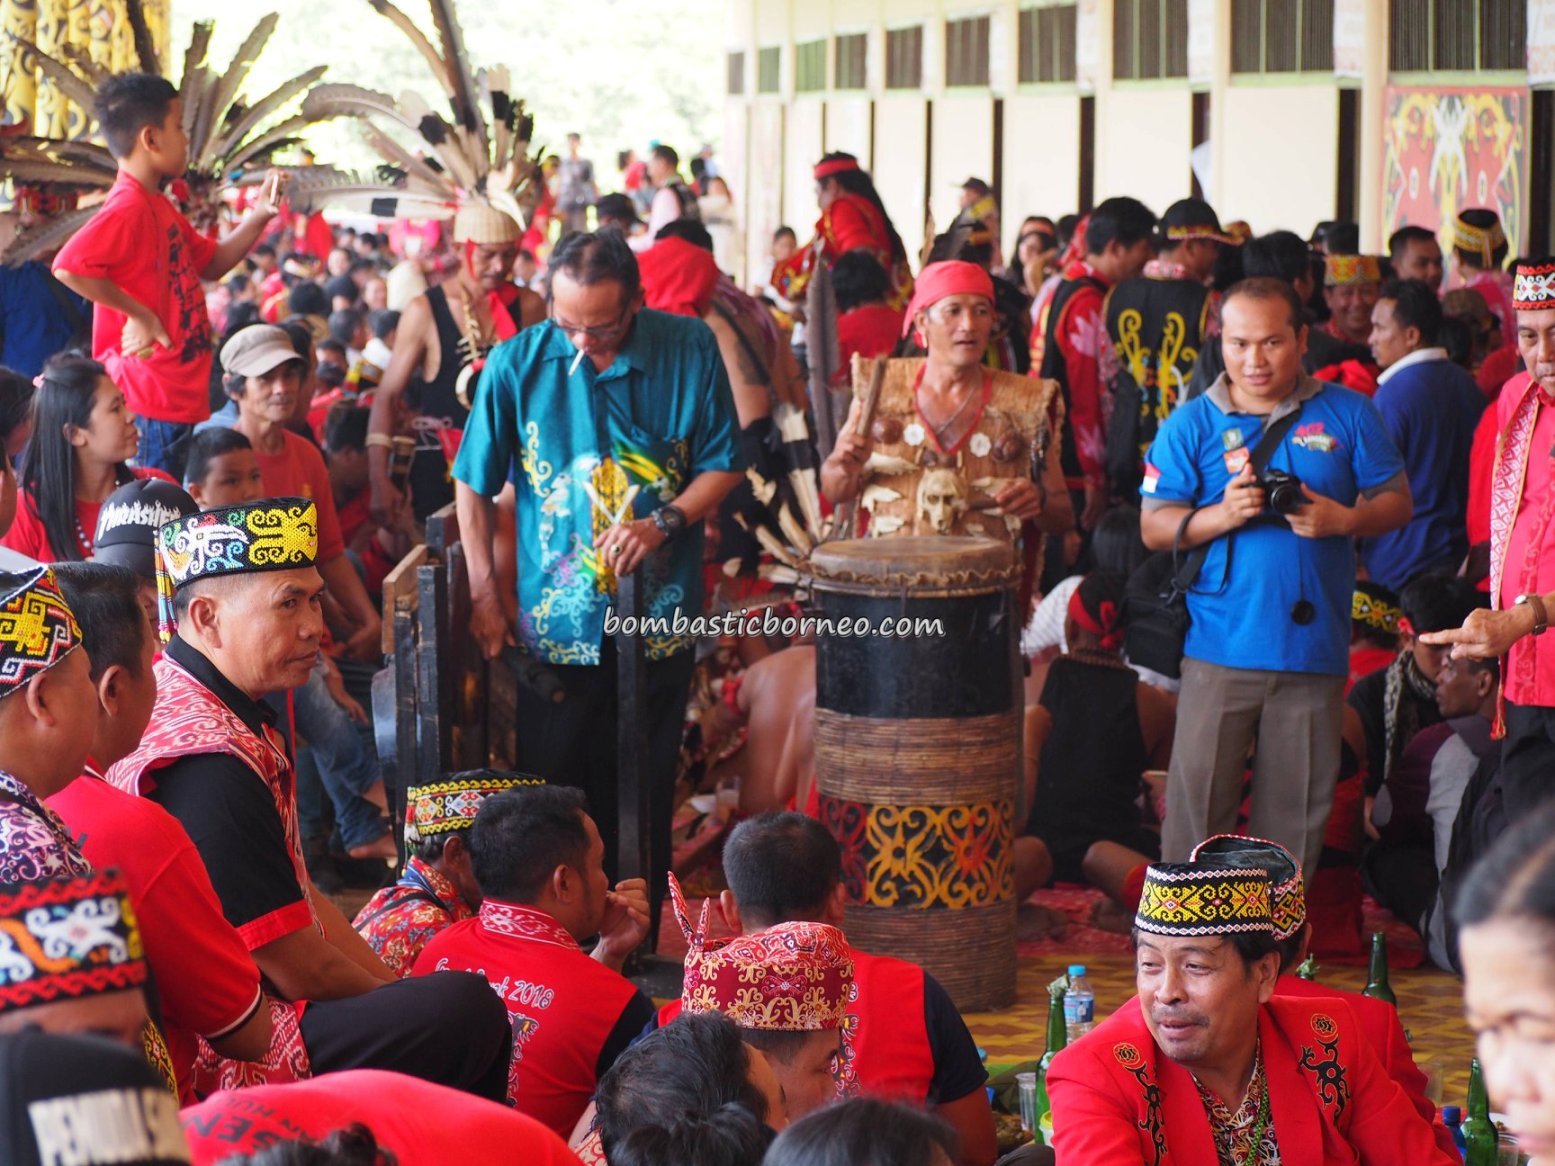 Dayak Sanggau, harvest festival, indigenous, backpackers, culture, event, Indonesia, native, tribal, Tourism, tourist attraction, travel guide, cross border, 穿越婆罗洲游踪, 印尼西加里曼丹, 达雅克丰收节日旅游